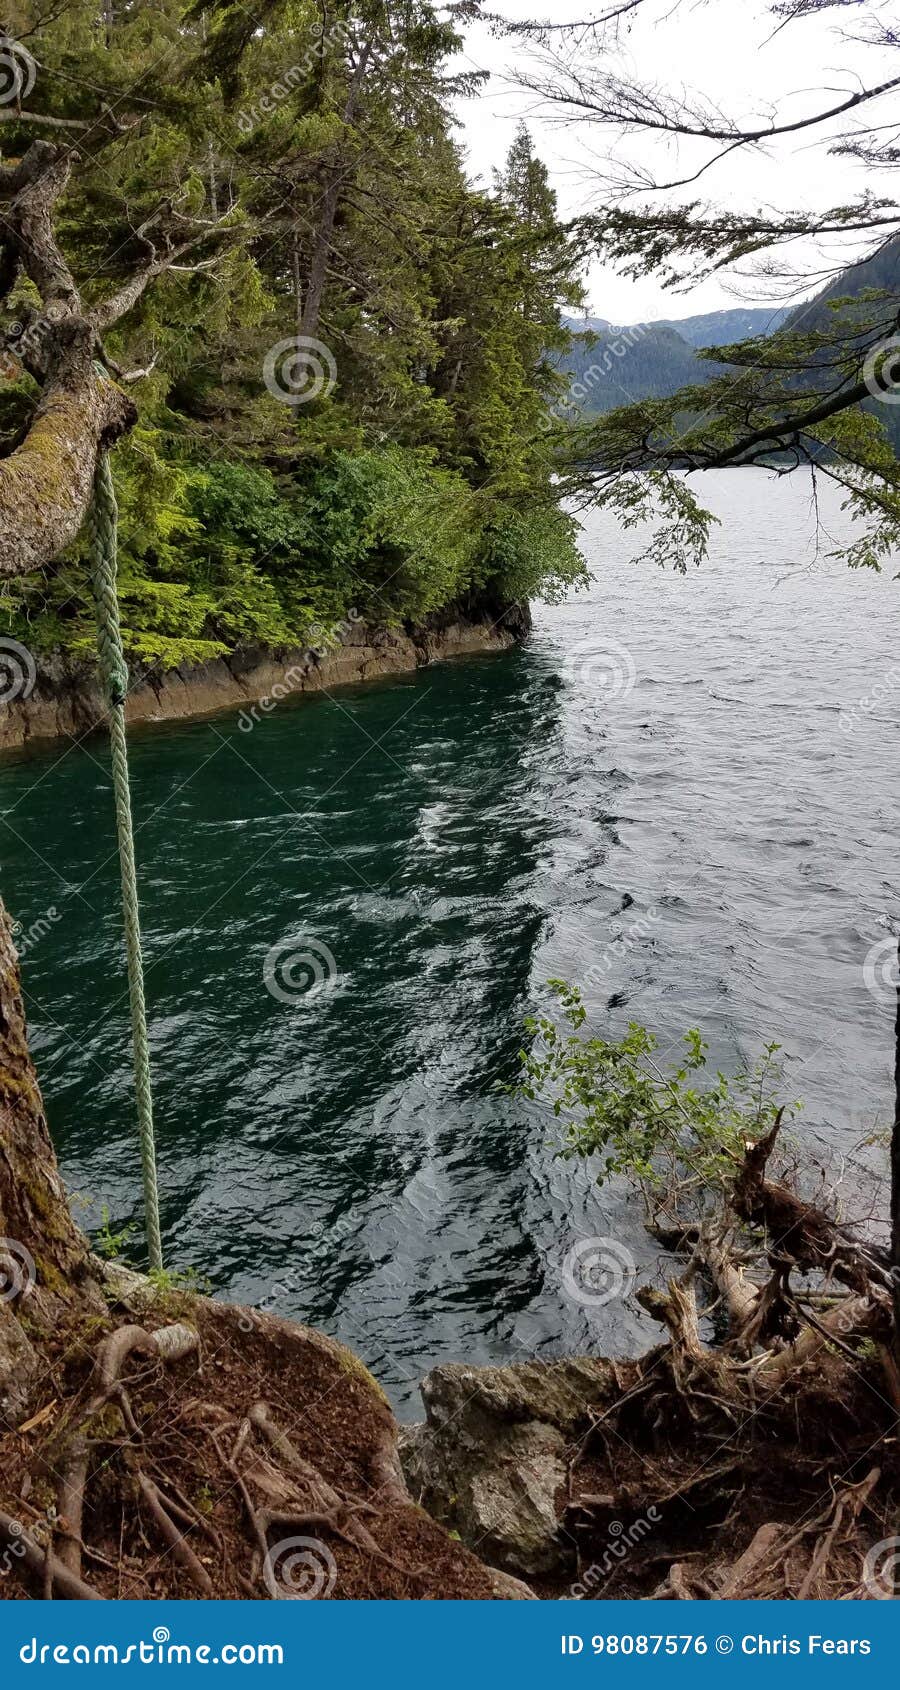 The rope swing stock photo. Image of swing, rope, swimming - 98087576